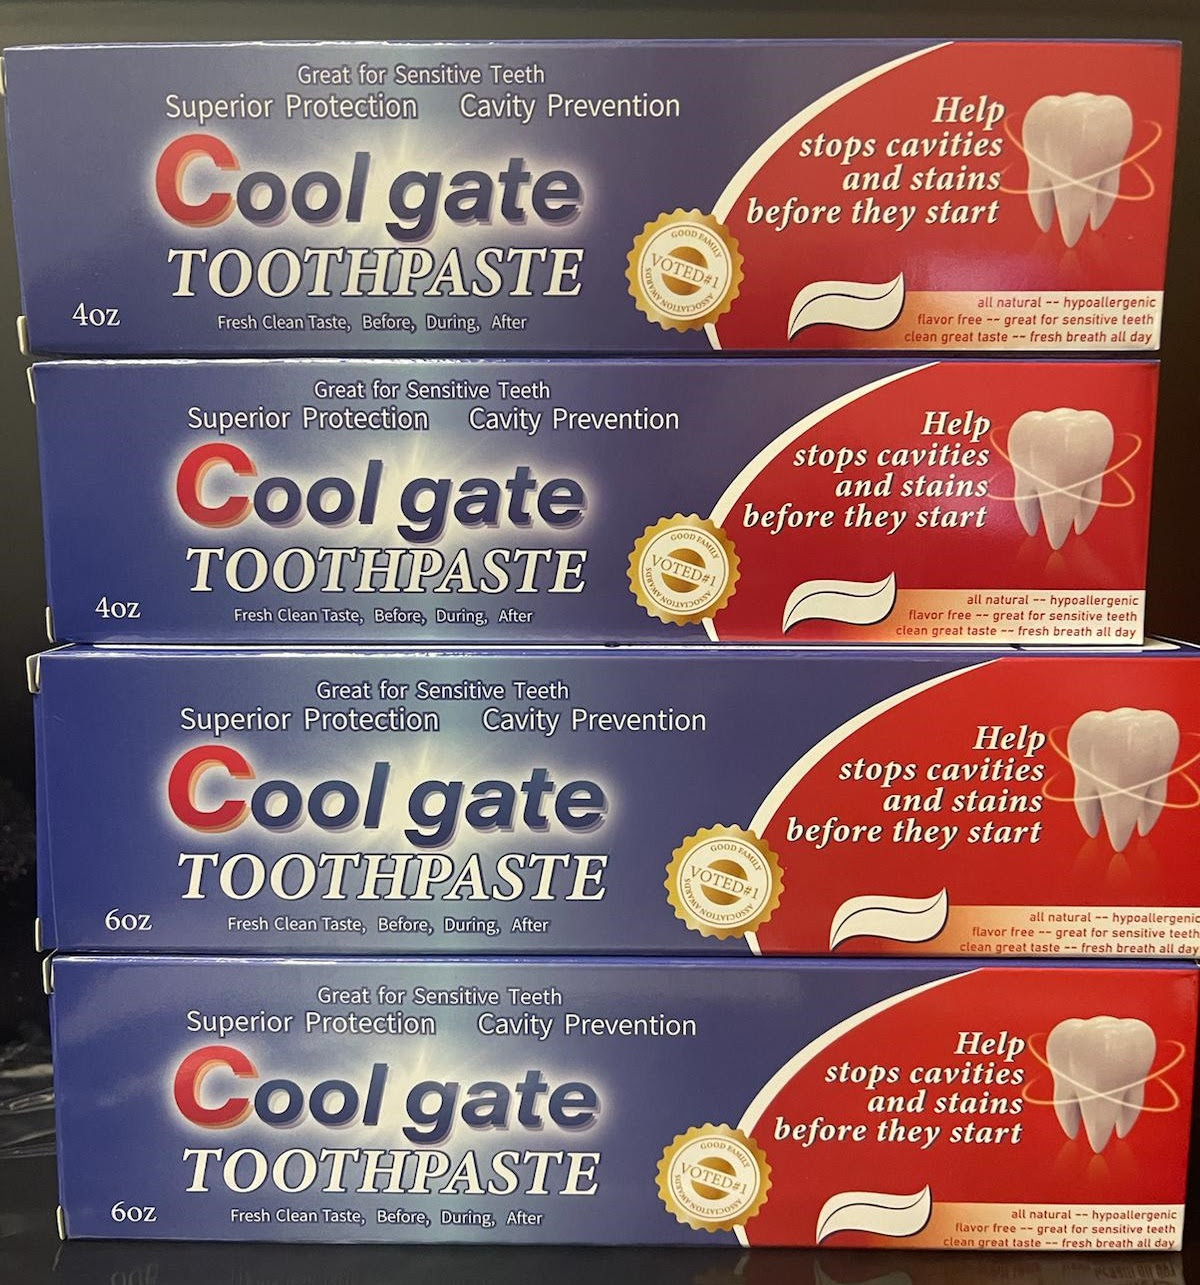 Cool gate 4oz Cavity Prevention Toothpaste. 45,000 units. EXW Ohio $0.75unit.